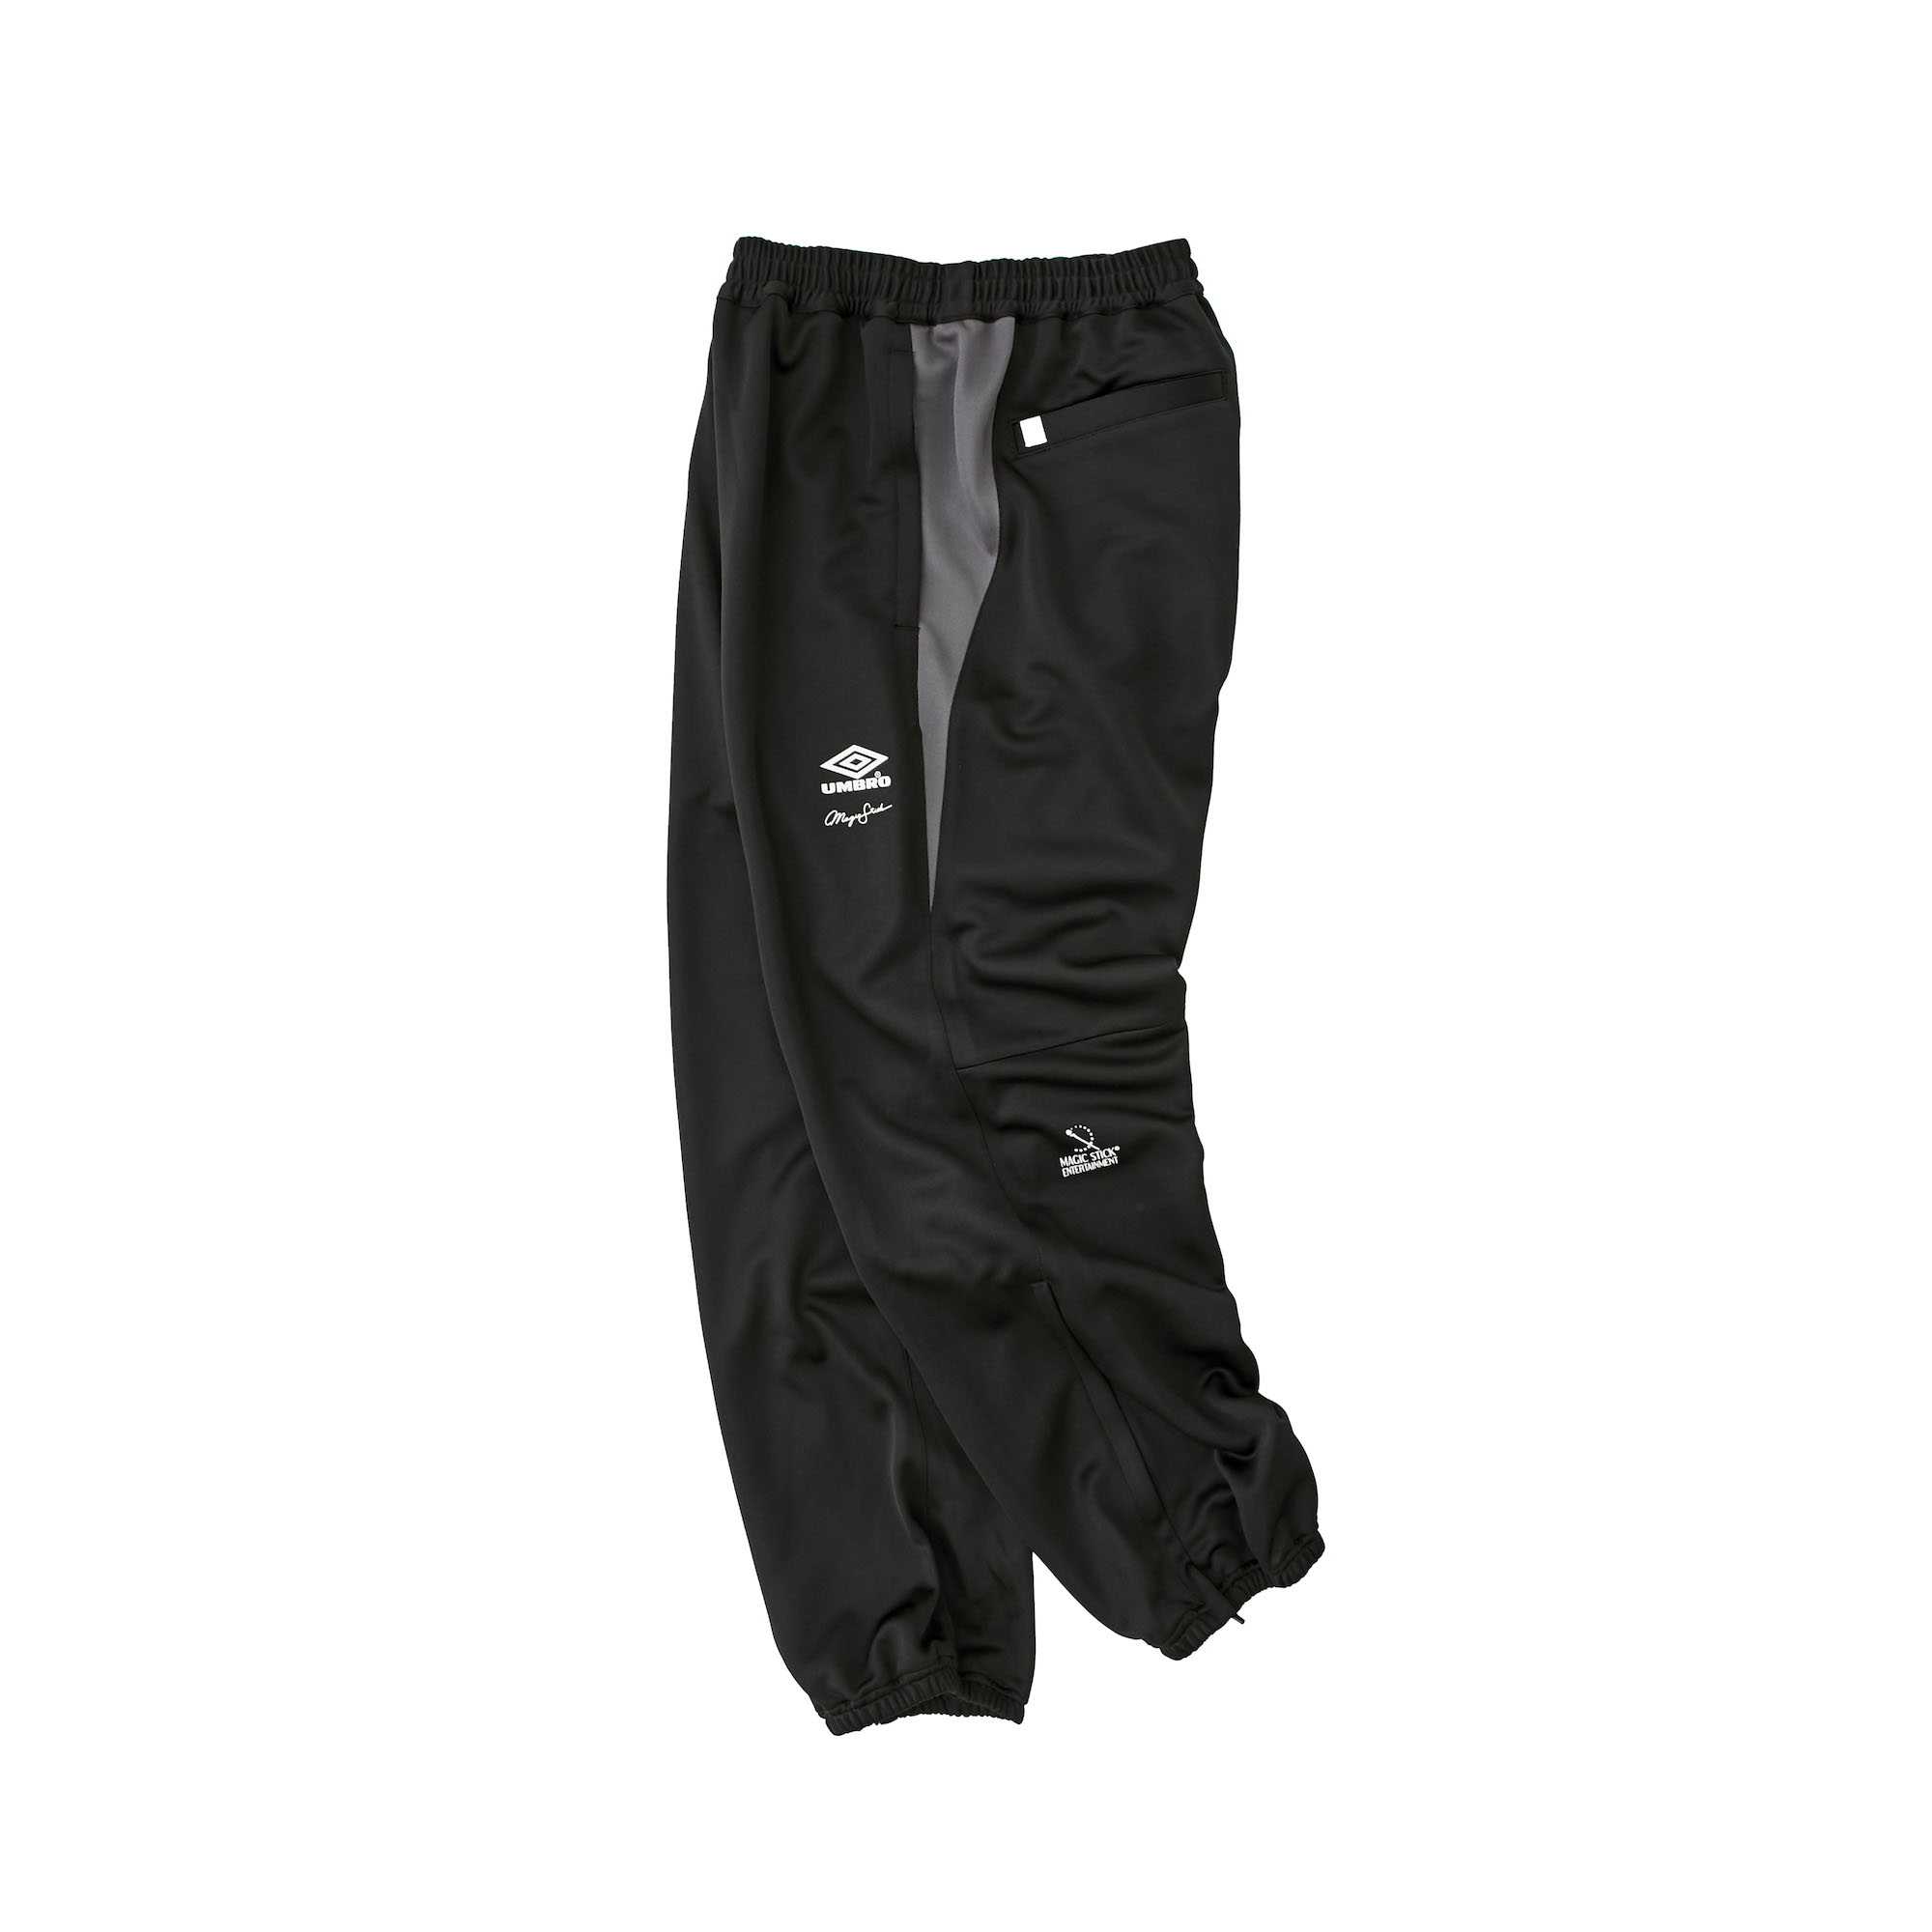 MAGIC STICK SPECIAL TRAINING JERSEY PANTS by UMBRO 24SS-MS2-010